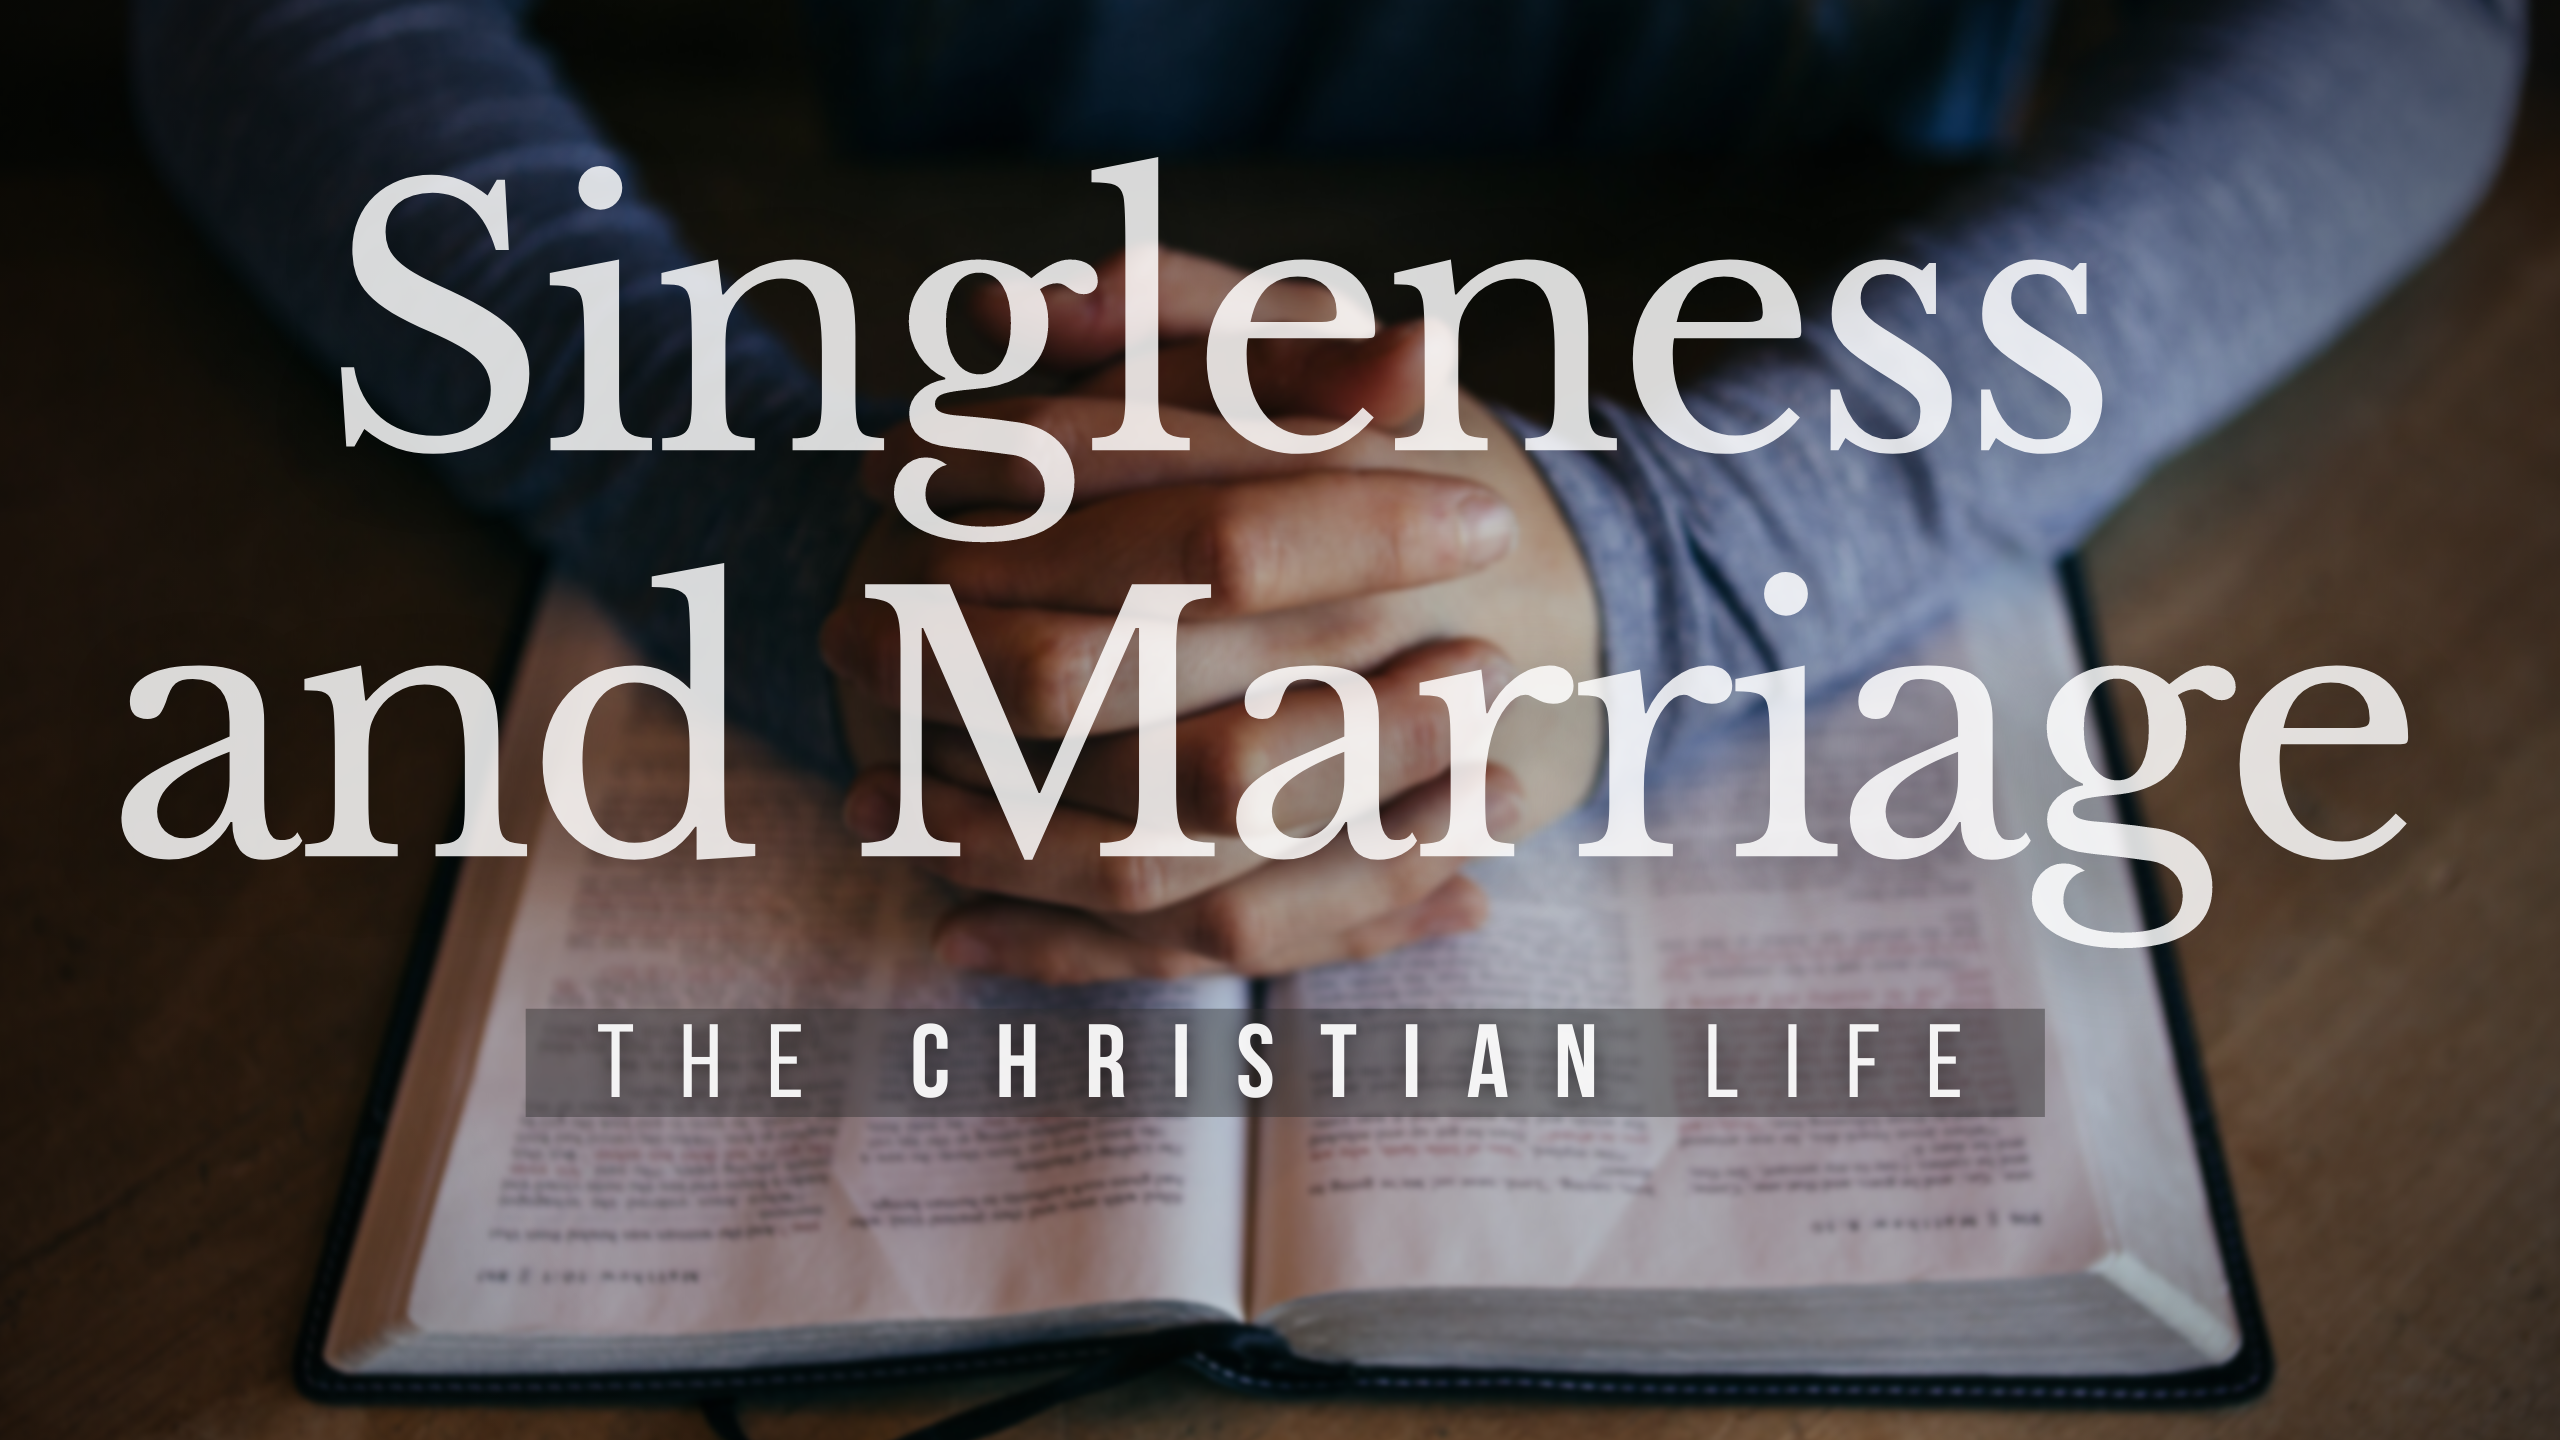 BIBLE STUDY: The Christian life - Singleness and Marriage 